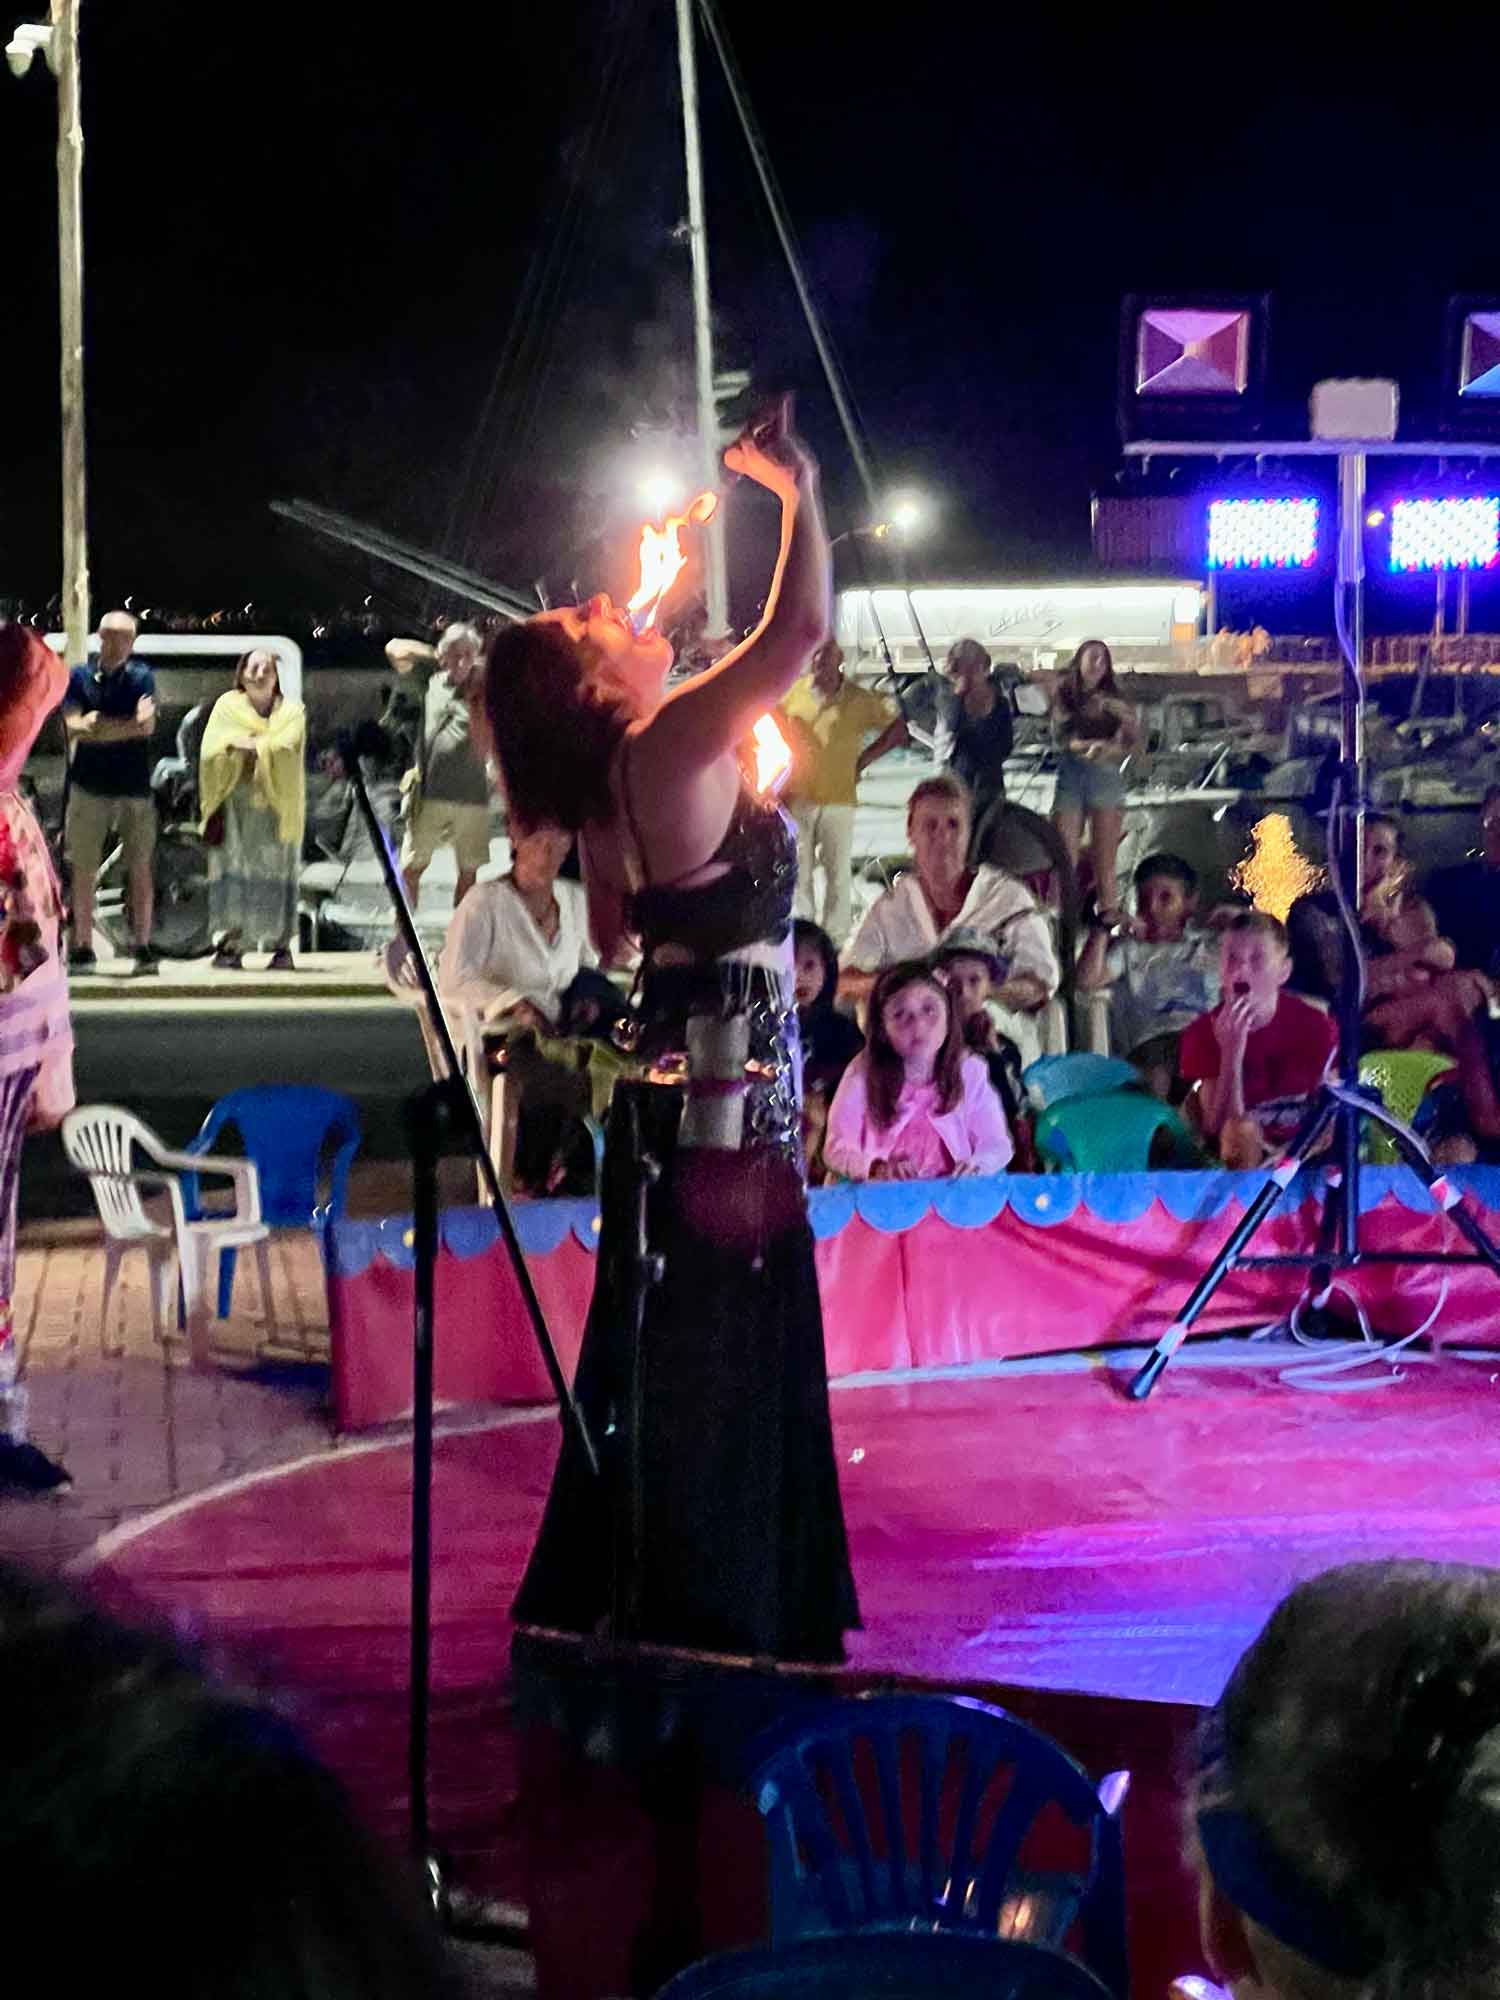 A woman at a carnival breathes fire